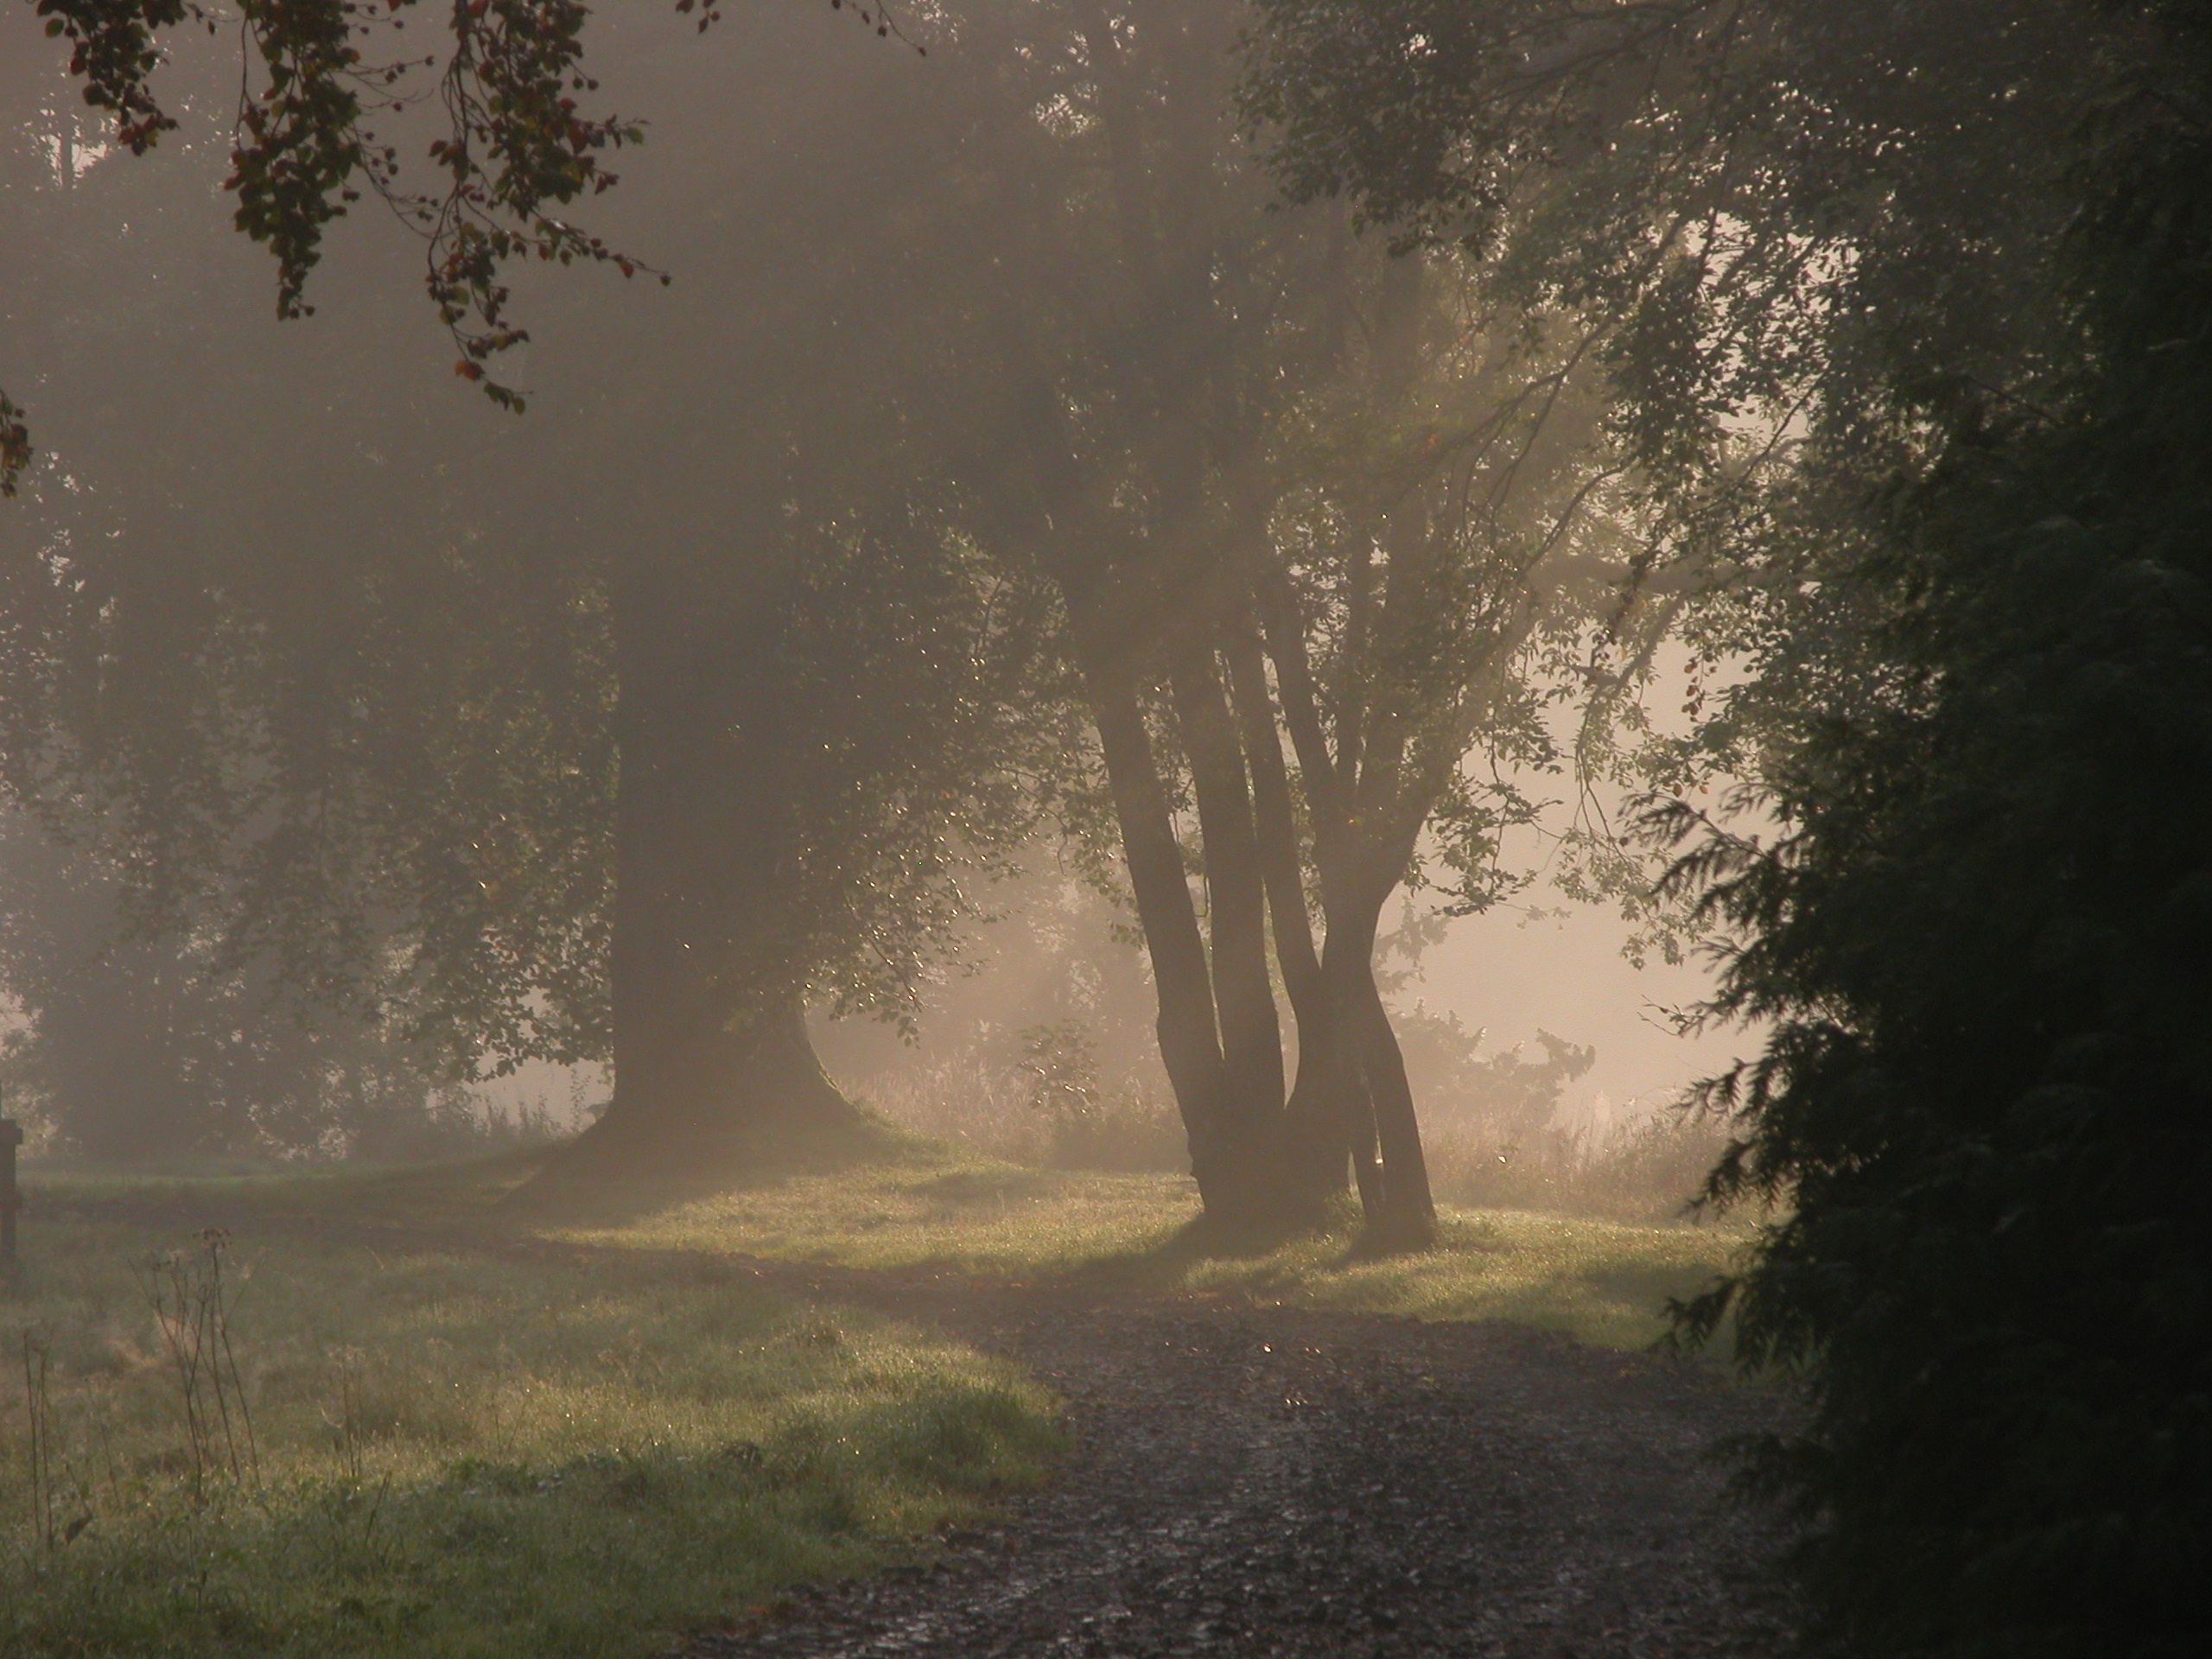 Misty forest path immersed in fog.